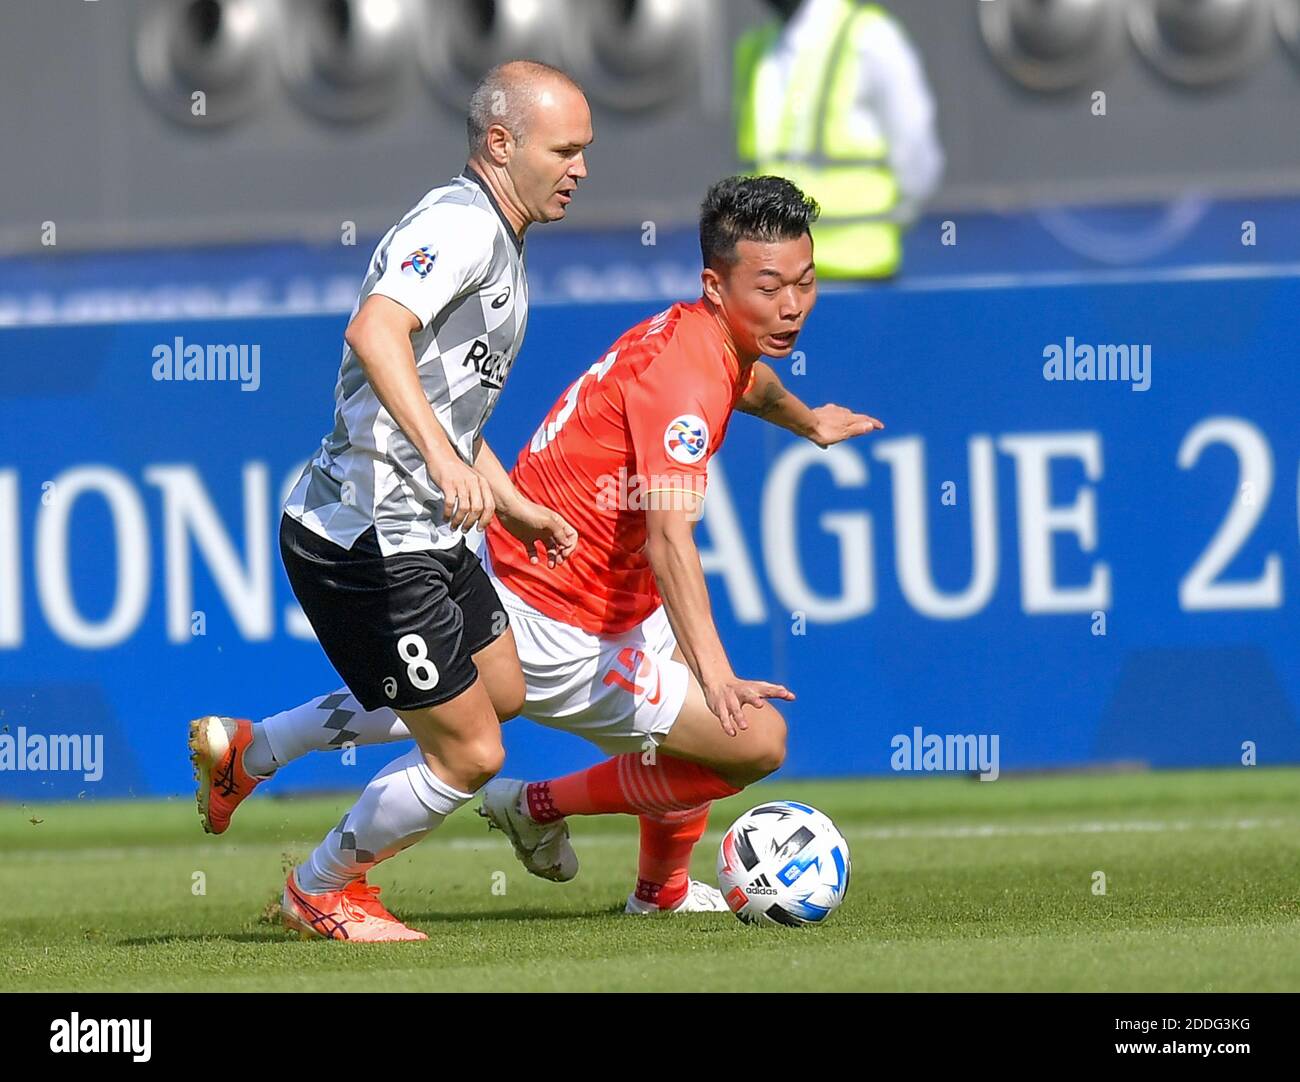 Doha, Qatar. 25th Nov, 2020. Andres Iniesta (L) of Vissel Kobe vies with Yan Dinghao of Guangzhou Evergrande FC during a Group G football match of the AFC Champions League in Doha, Qatar, Nov. 25, 2020. Credit: Nikku/Xinhua/Alamy Live News Stock Photo